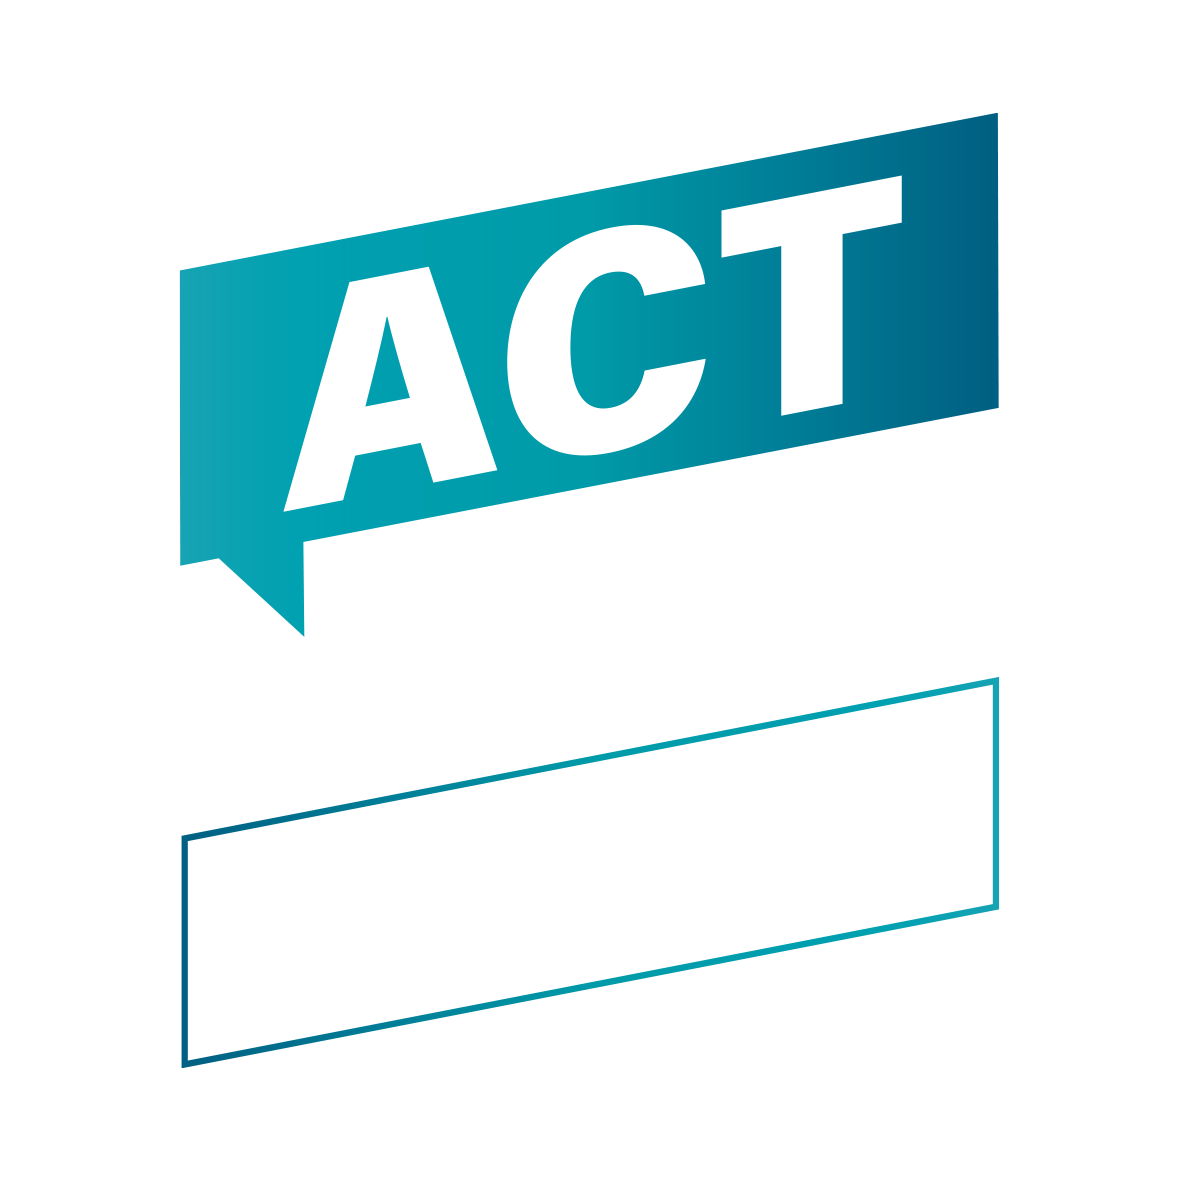 Act on NCDS - Investment logo negative